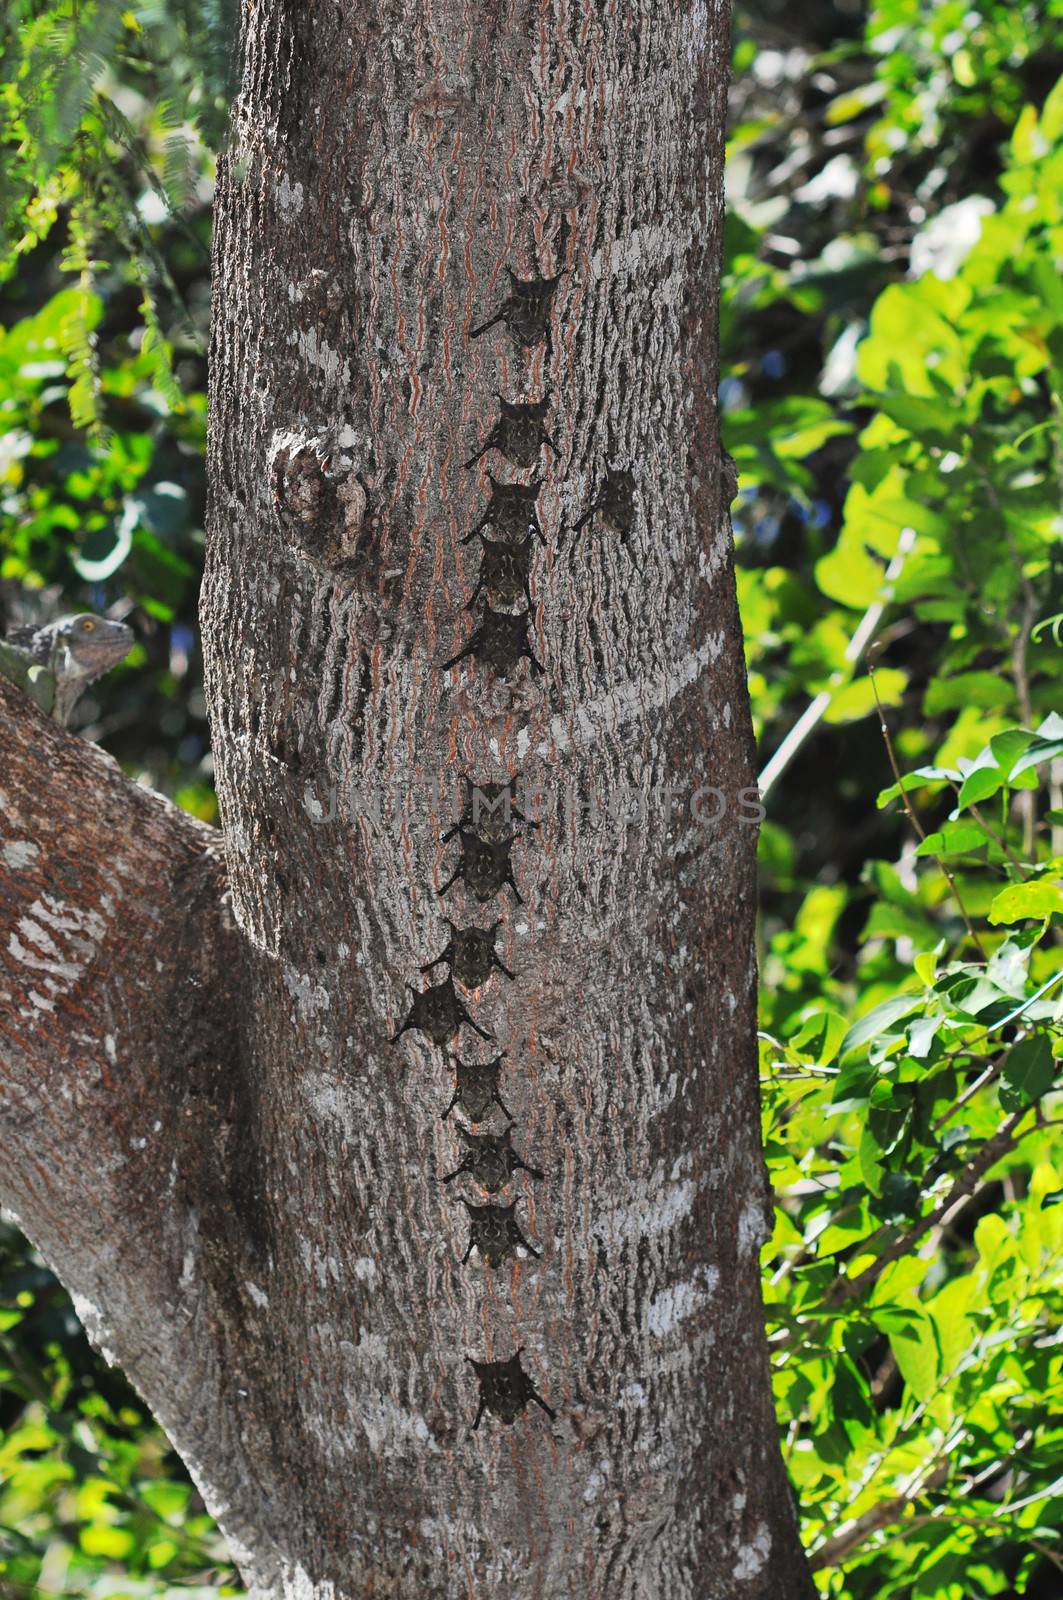 Bats in a row on tree trunk by Mirage3